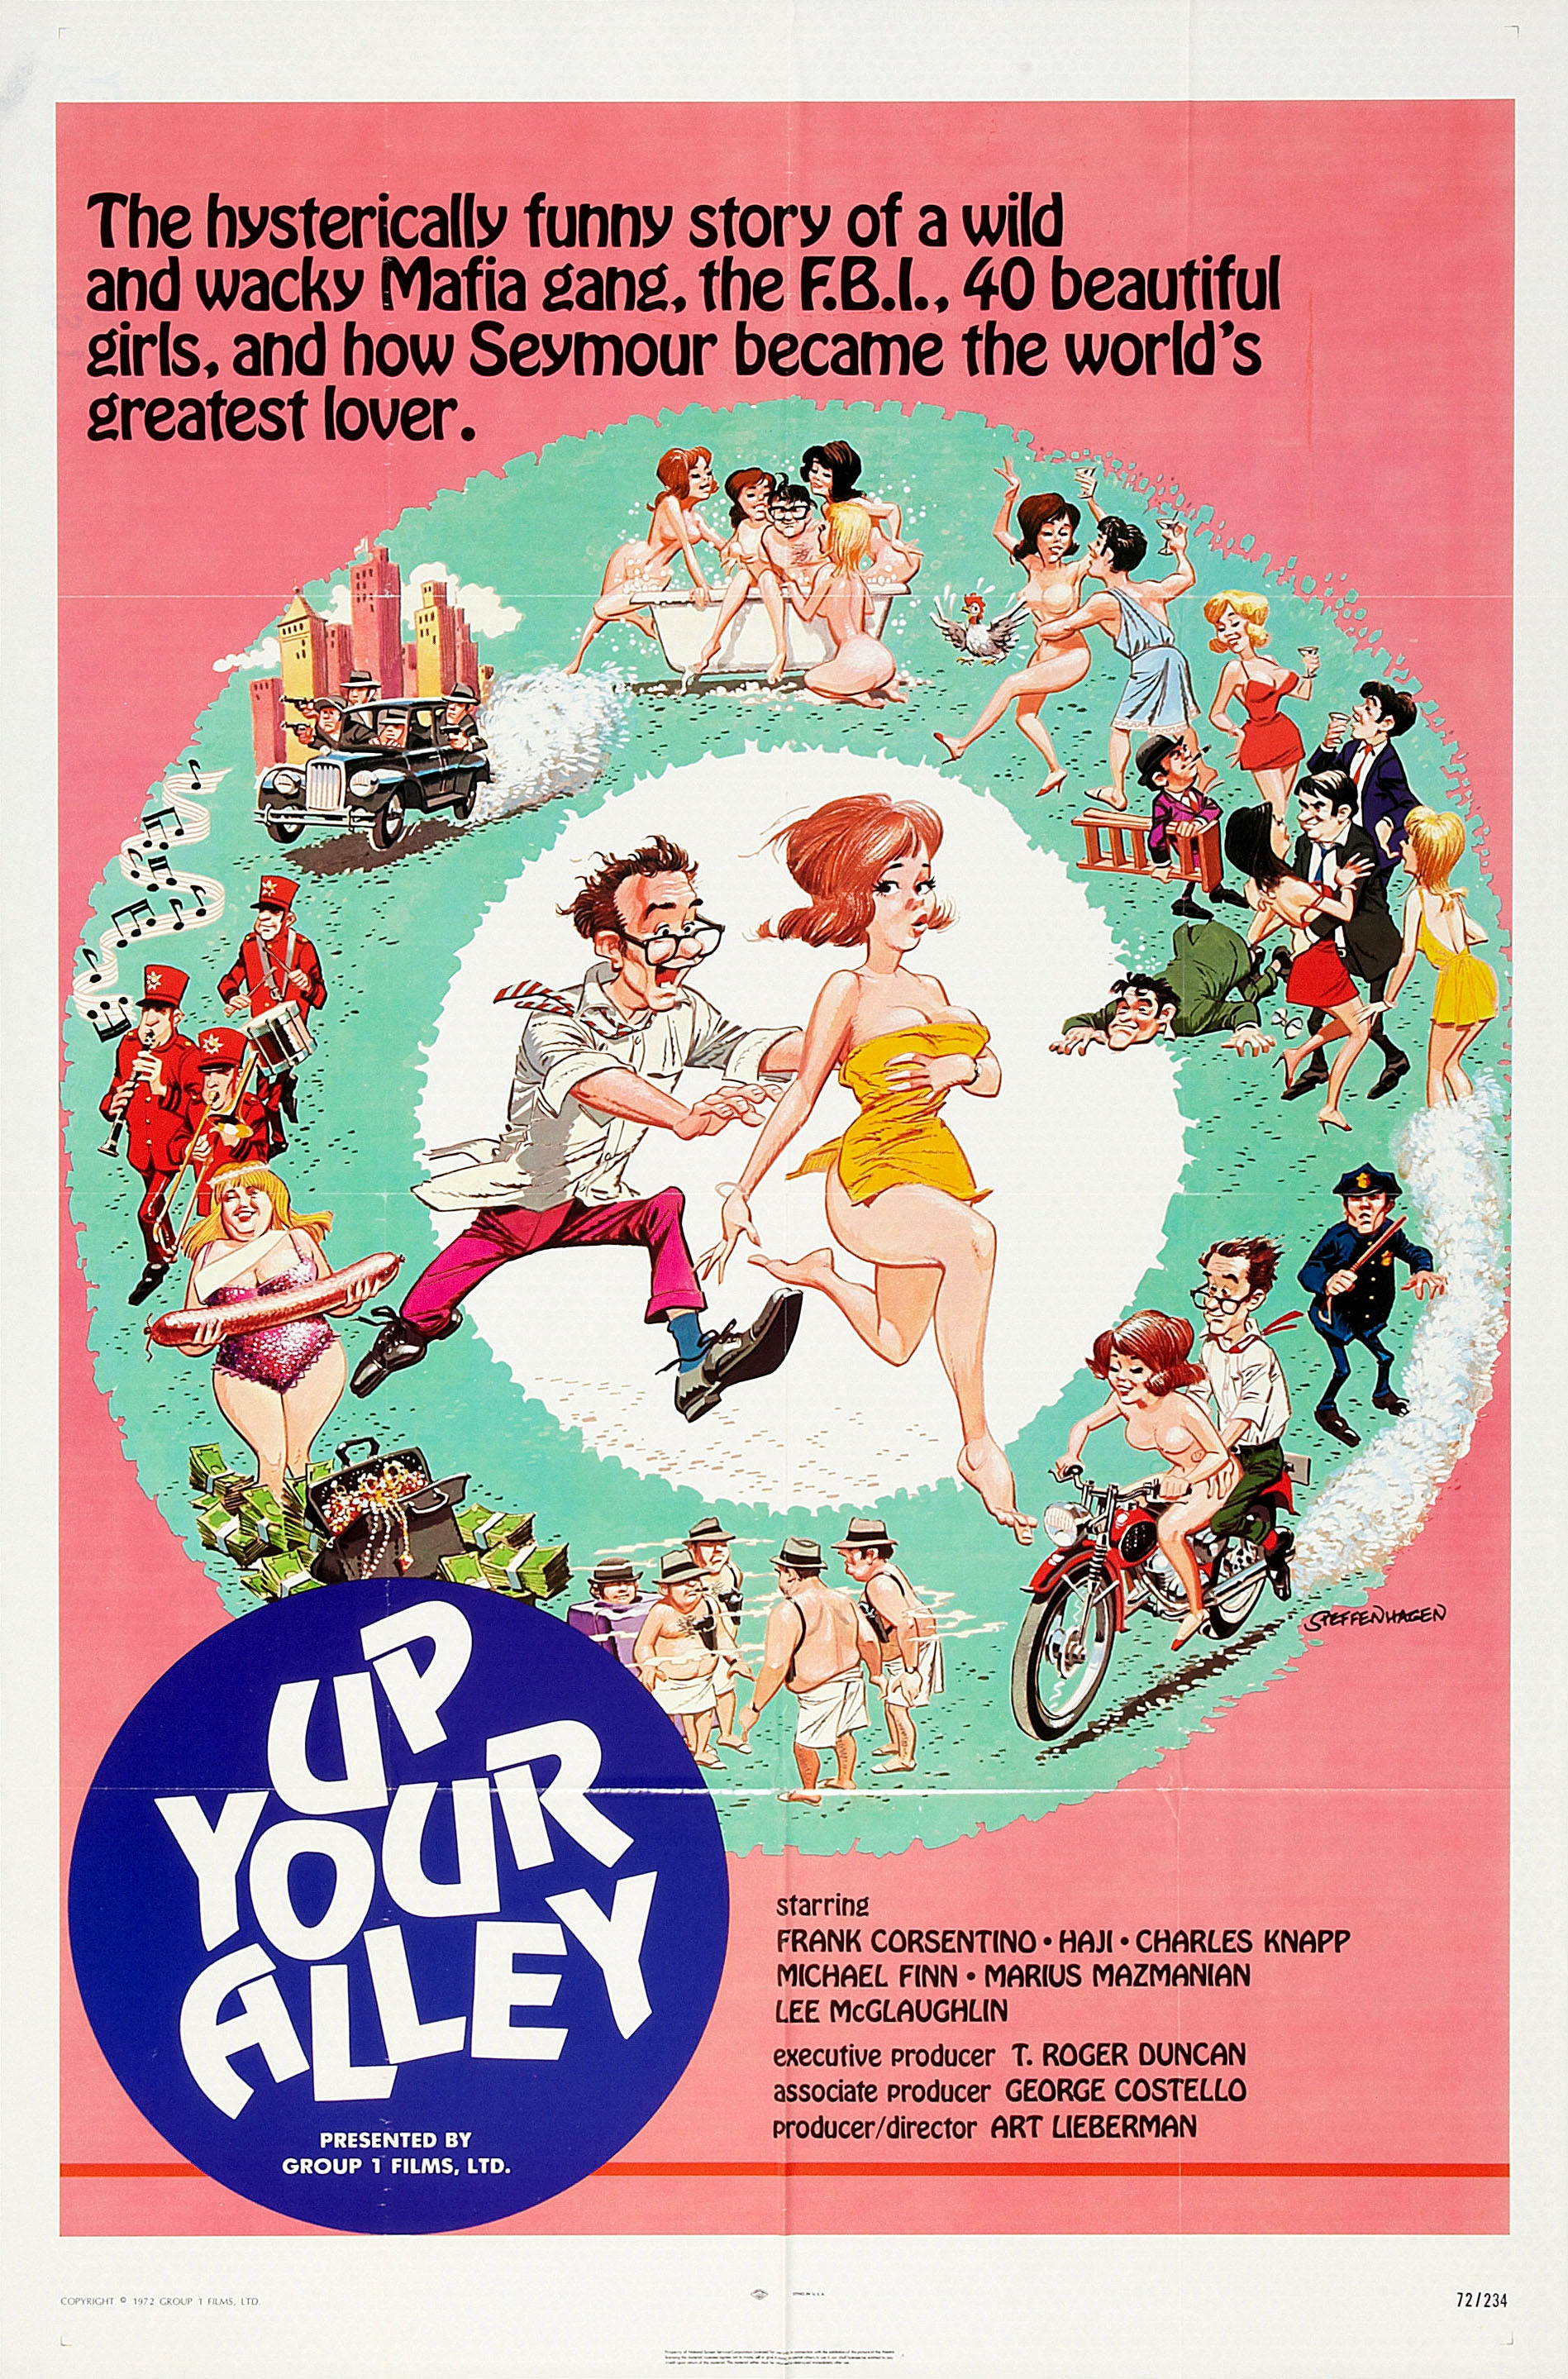 Up Your Alley (1971) Screenshot 2 